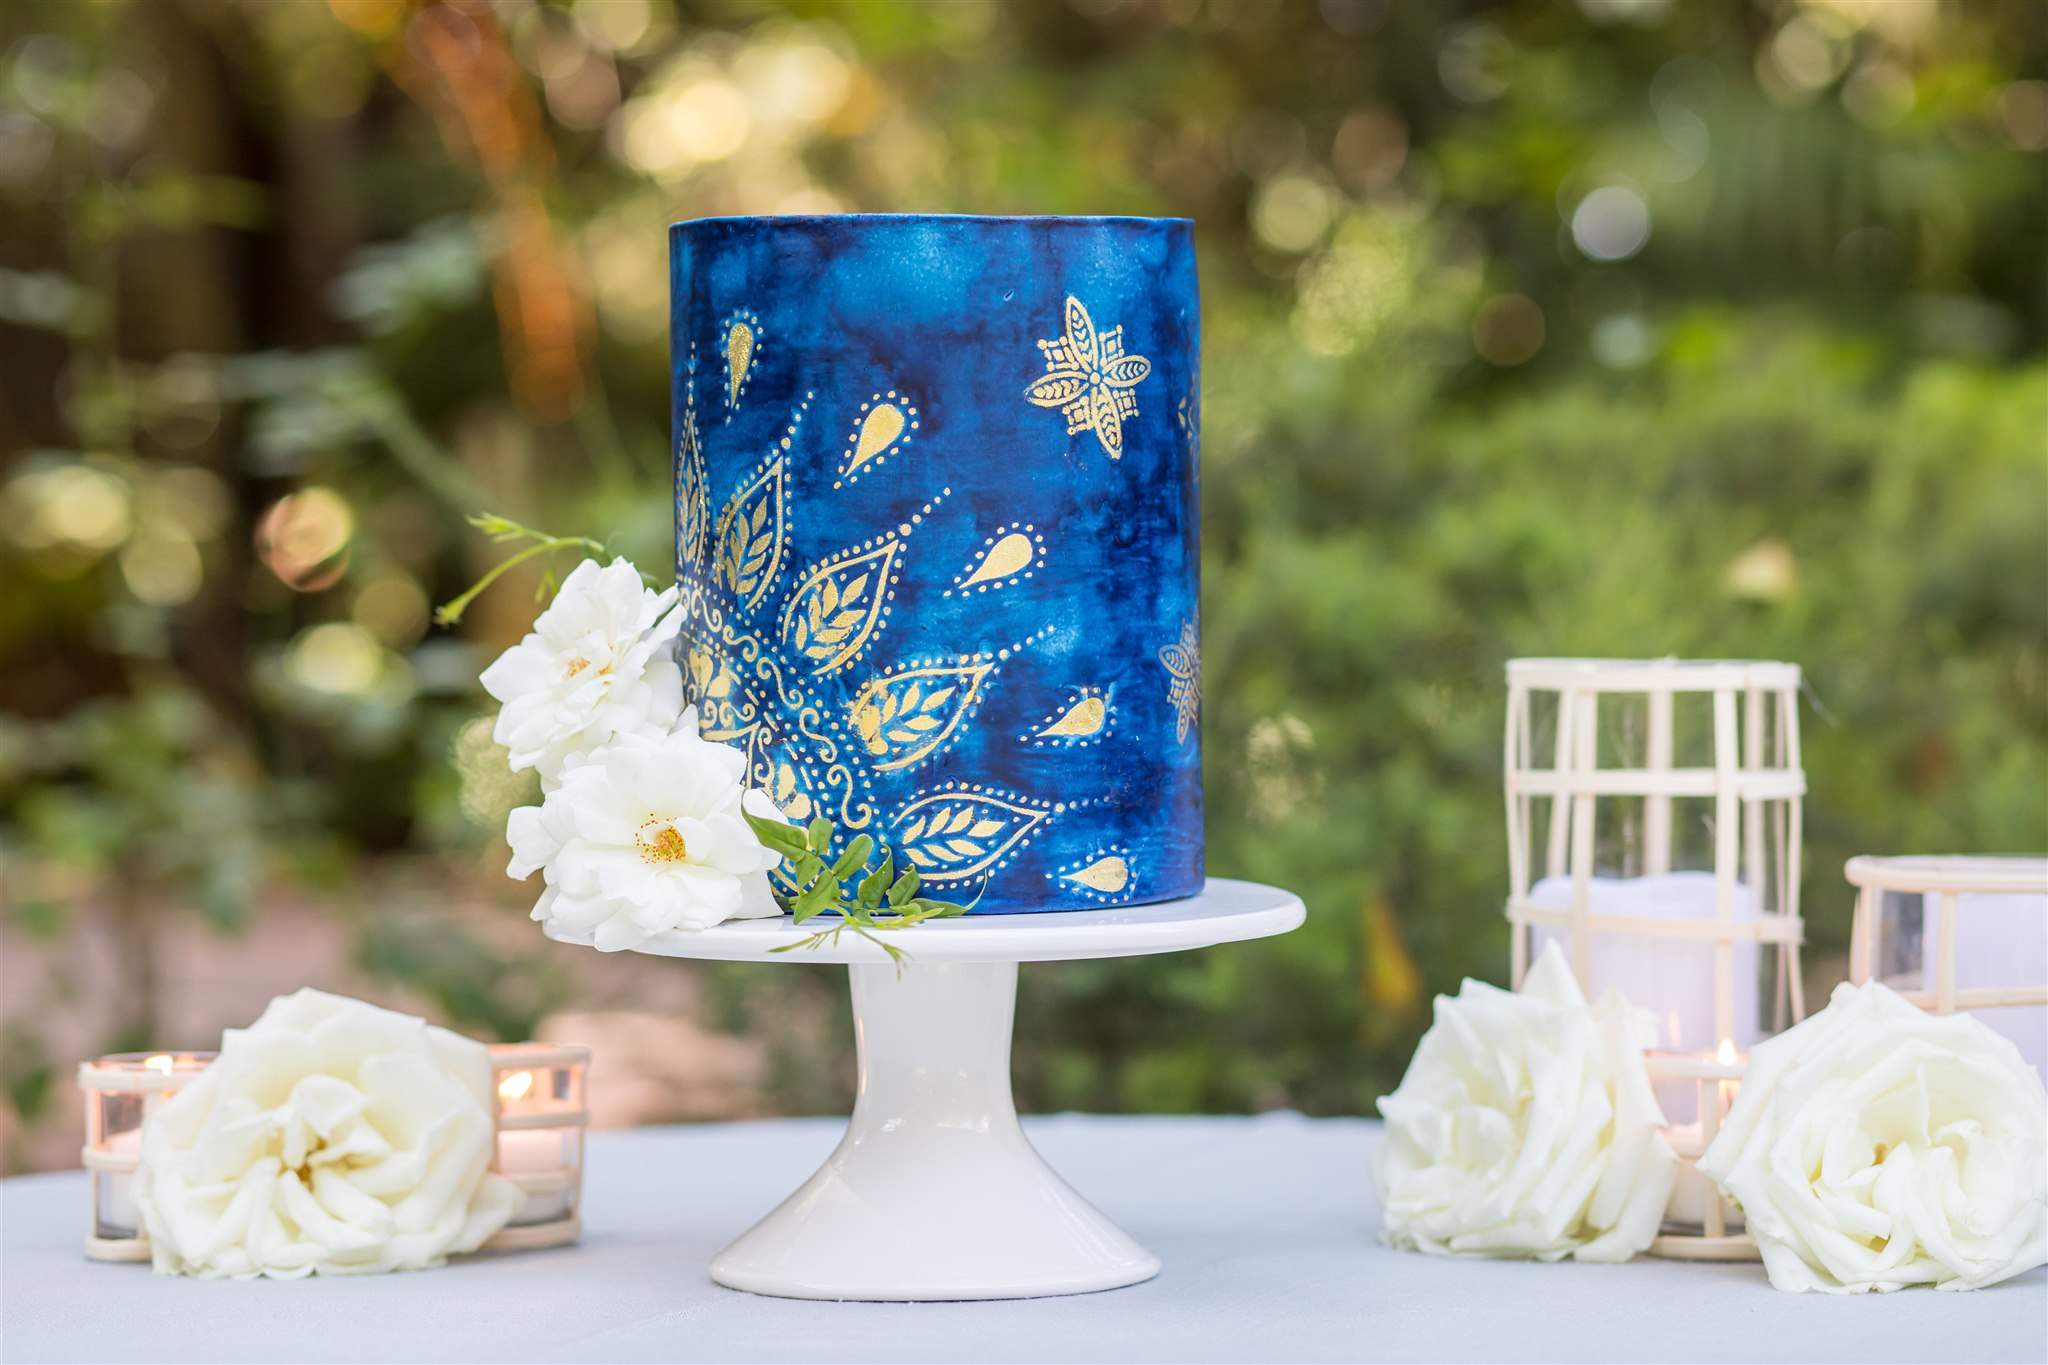 wedding cake table with dark blue cake on a white stand, lanterns and white florals at Hartley Botanica wedding venue